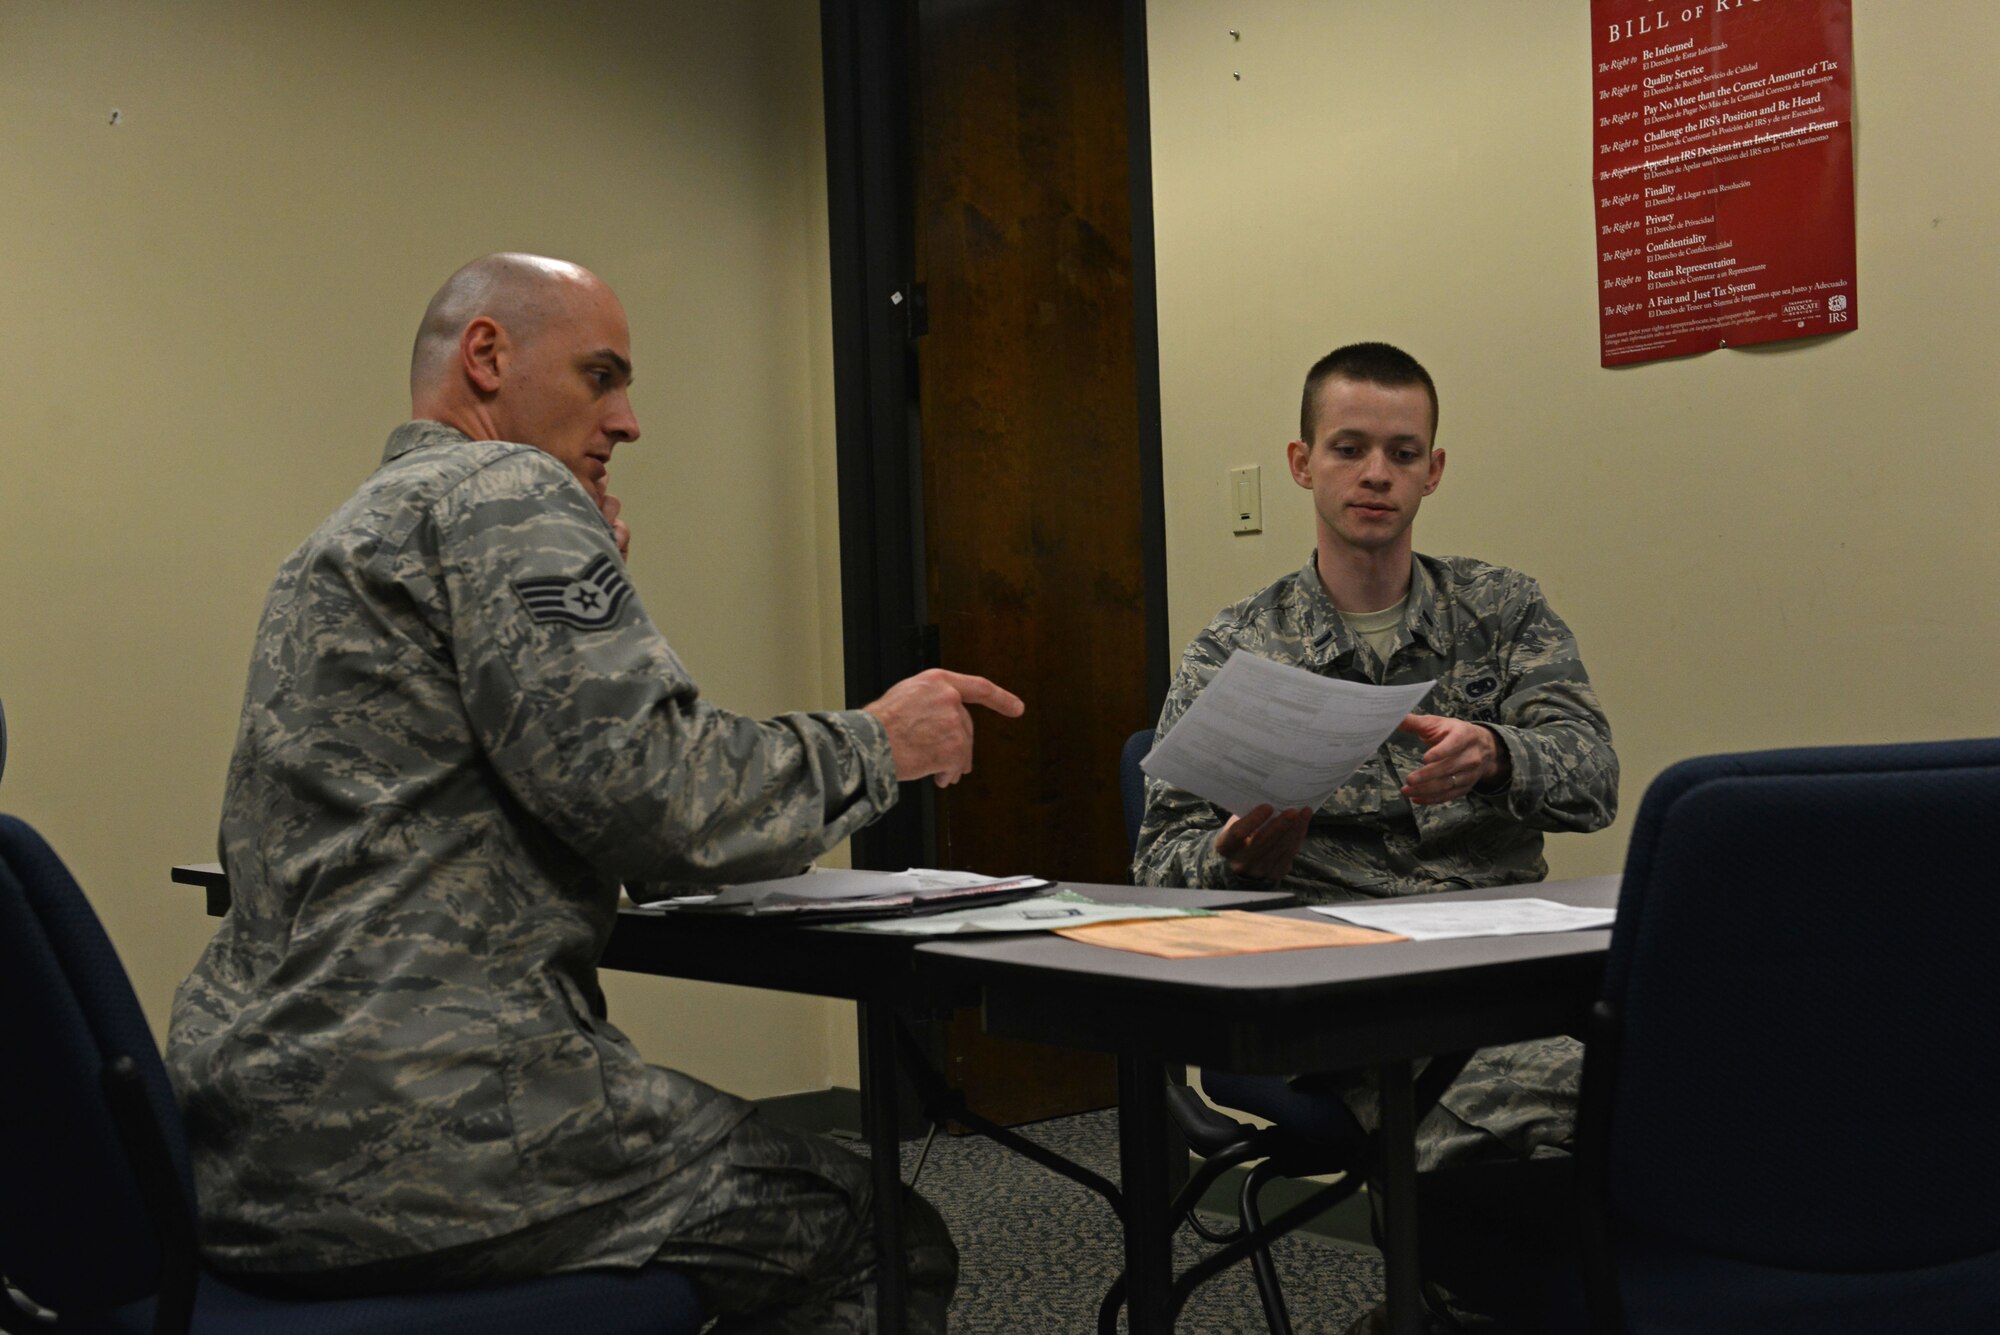 U.S. Air Force Staff Sgt. Gustab Monaco, 20th Equipment Maintenance Squadron aircraft structural maintenance craftsman, discusses tax forms with 1st Lt. Matthew Zollmann, 20th Logistics Readiness Squadron fuels management flight commander and tax center volunteer, at Shaw Air Force Base, S.C., Feb. 6, 2017. Accepting both reservations and walk-ins, tax center volunteers are available until April 18 to walk service members and retirees through filing their taxes. (U.S. Air Force photo by Airman 1st Class Destinee Sweeney)